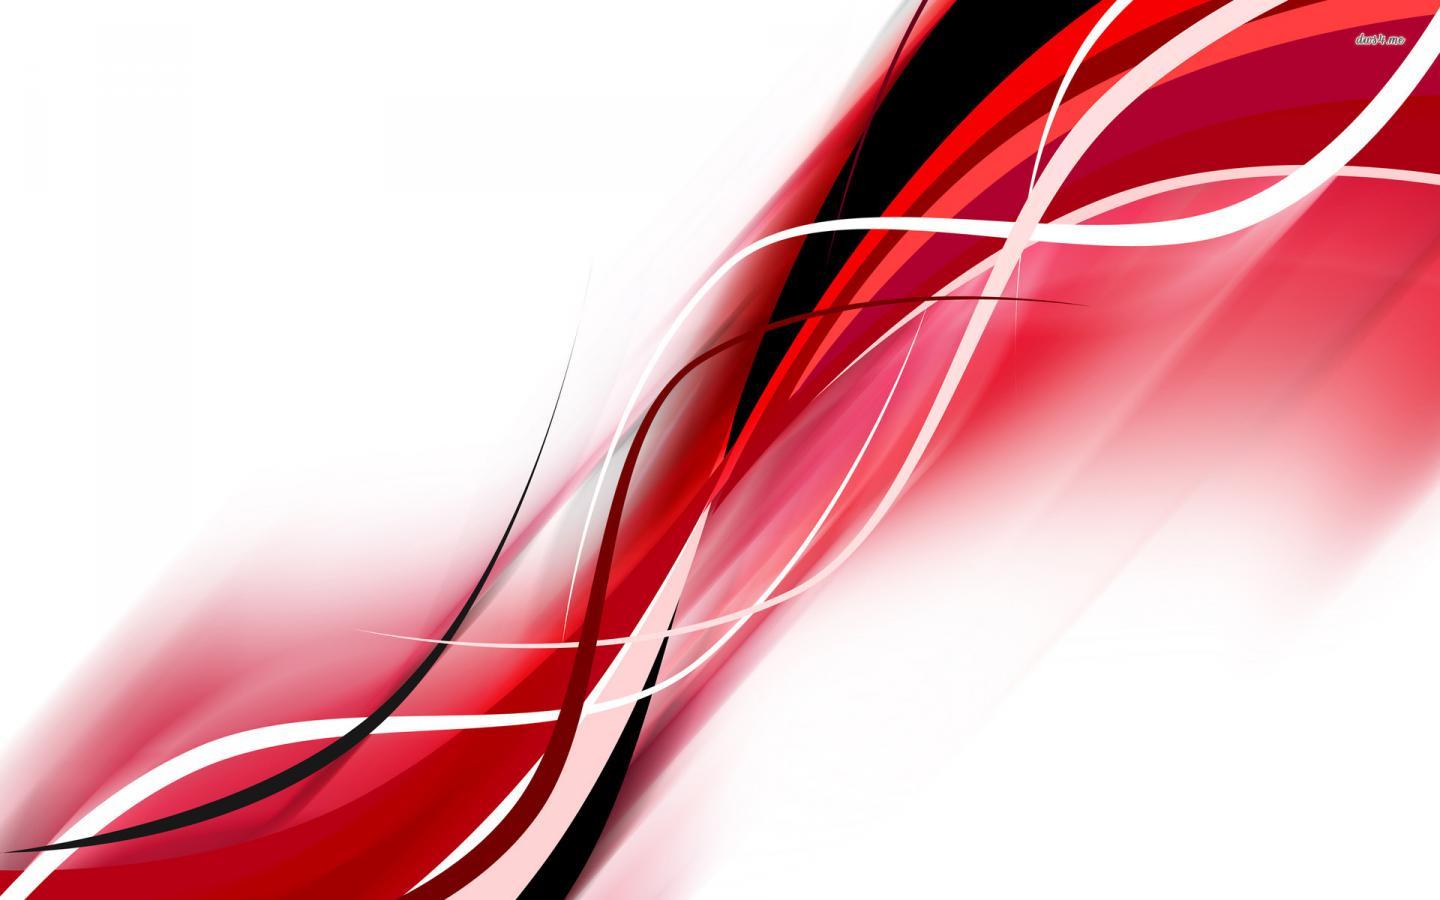 Red And Black Abstract Backgrounds 1440x900